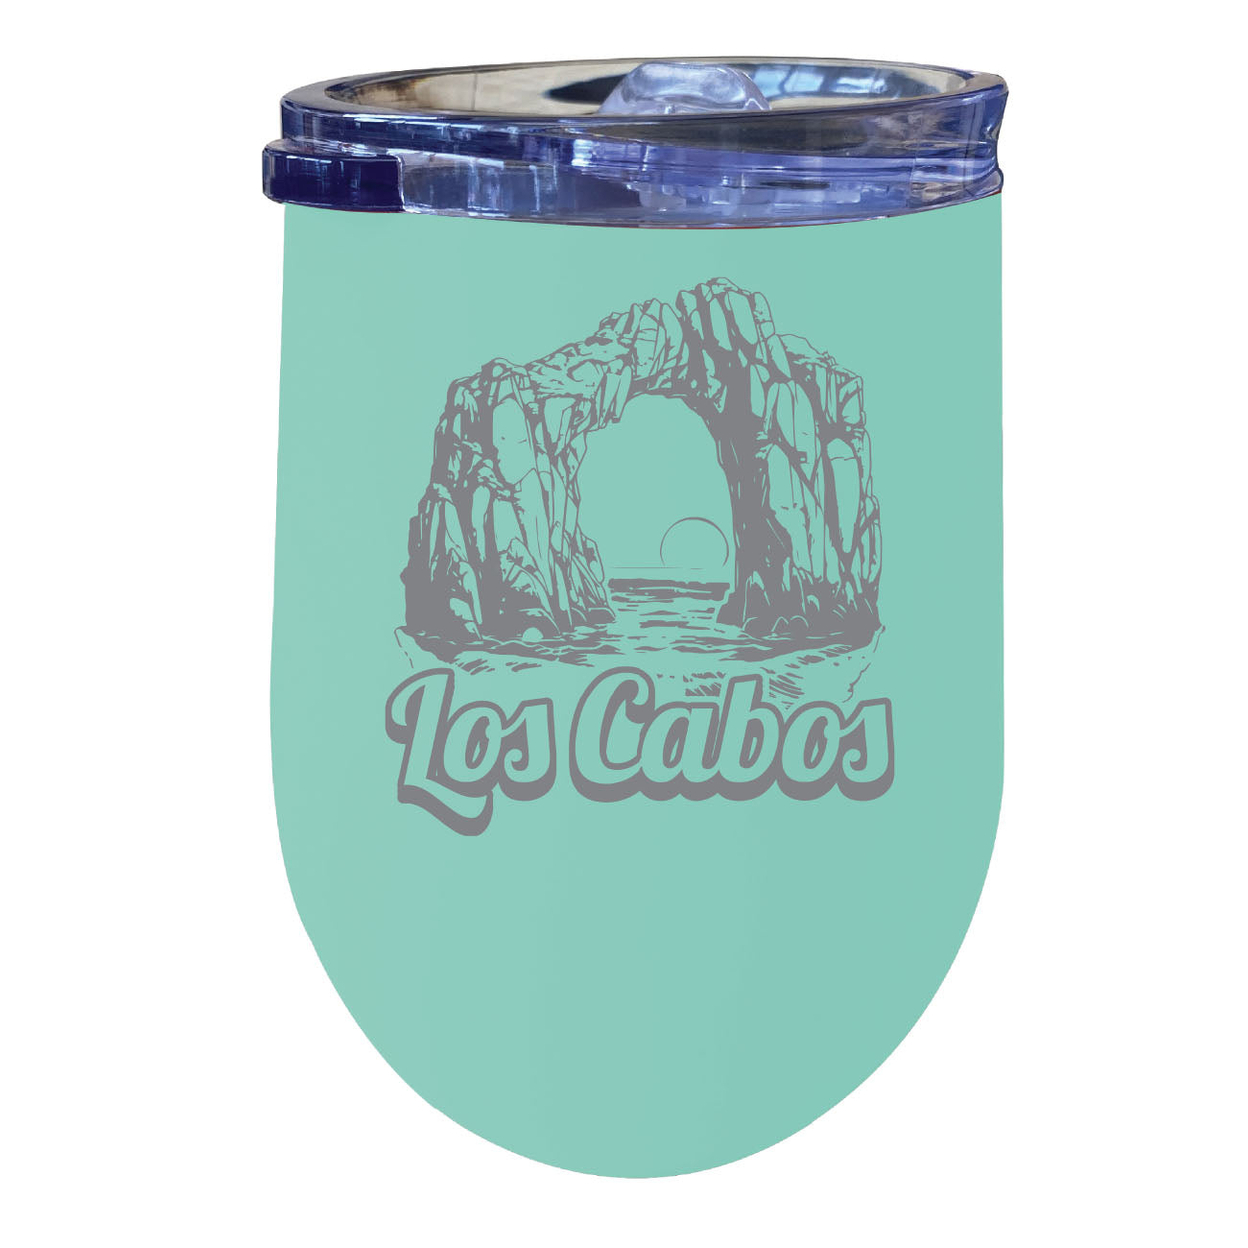 Los Cabos Mexico Souvenir 12 Oz Engraved Insulated Wine Stainless Steel Tumbler - Rainbow Glitter Gray,,Single Unit